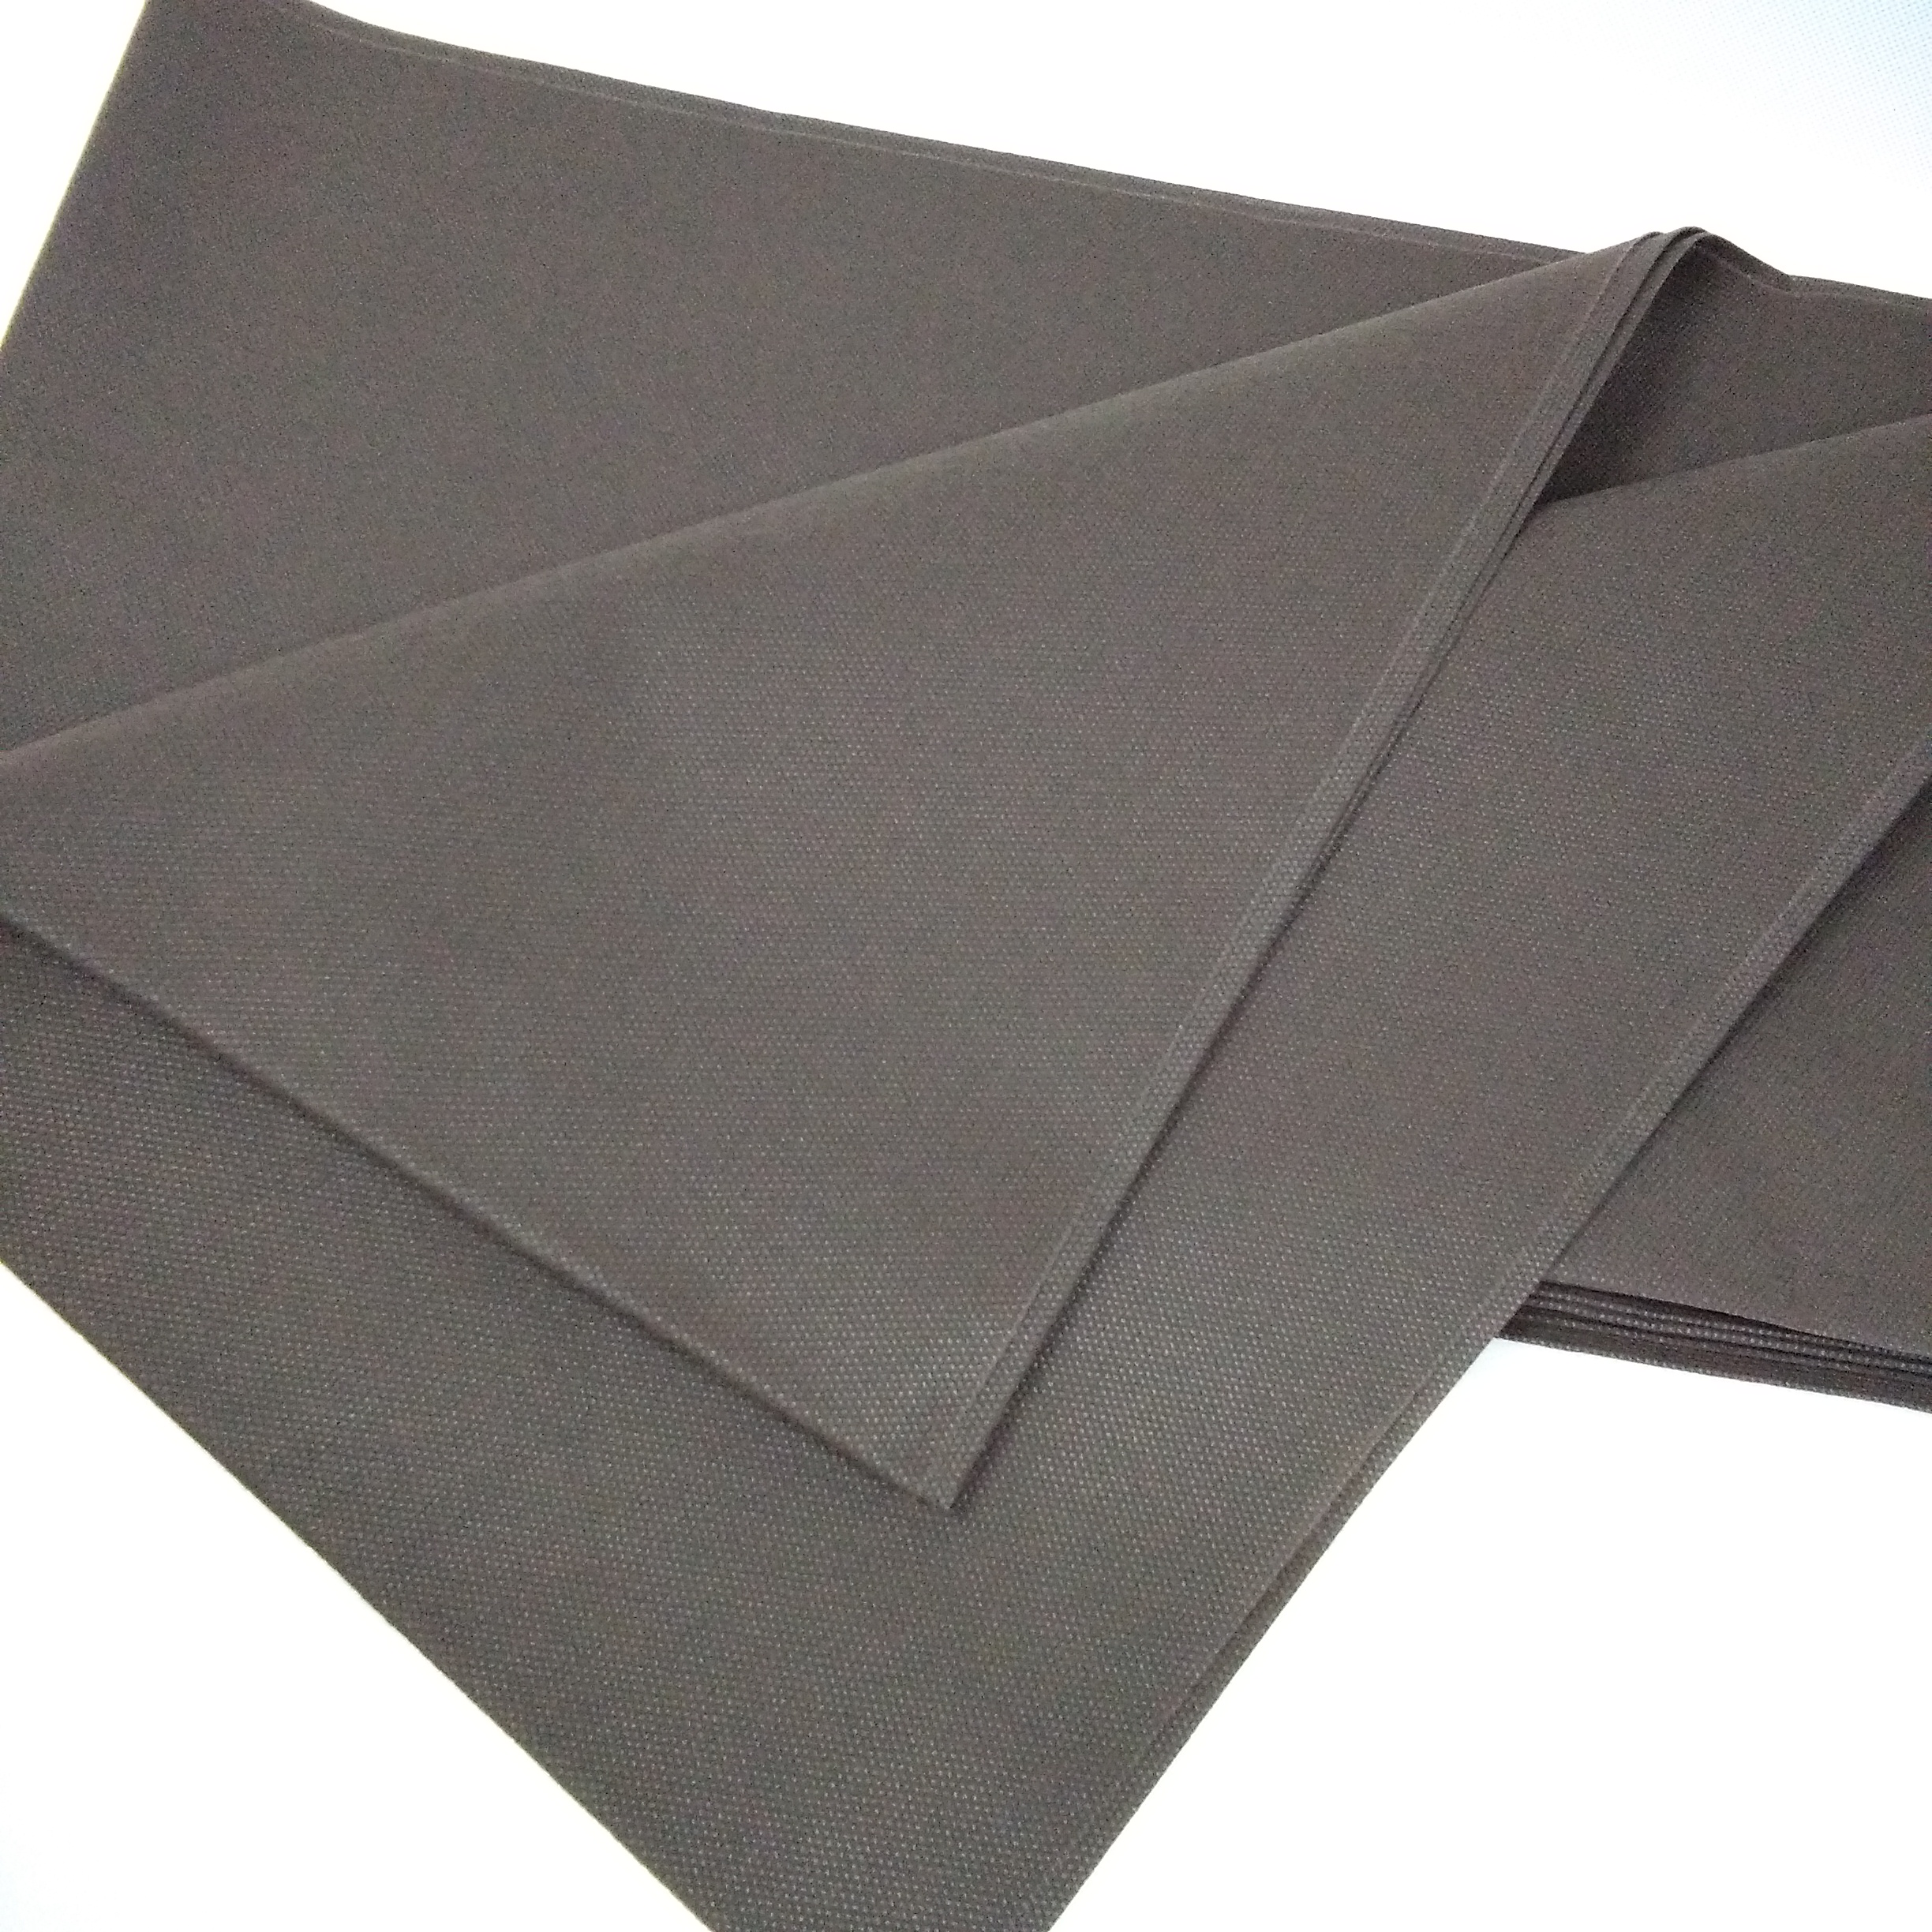 Stock Sliced tablecloth 45gsm 1m*1m nonwoven table-cloth waterproof colorful 25pcs/bag